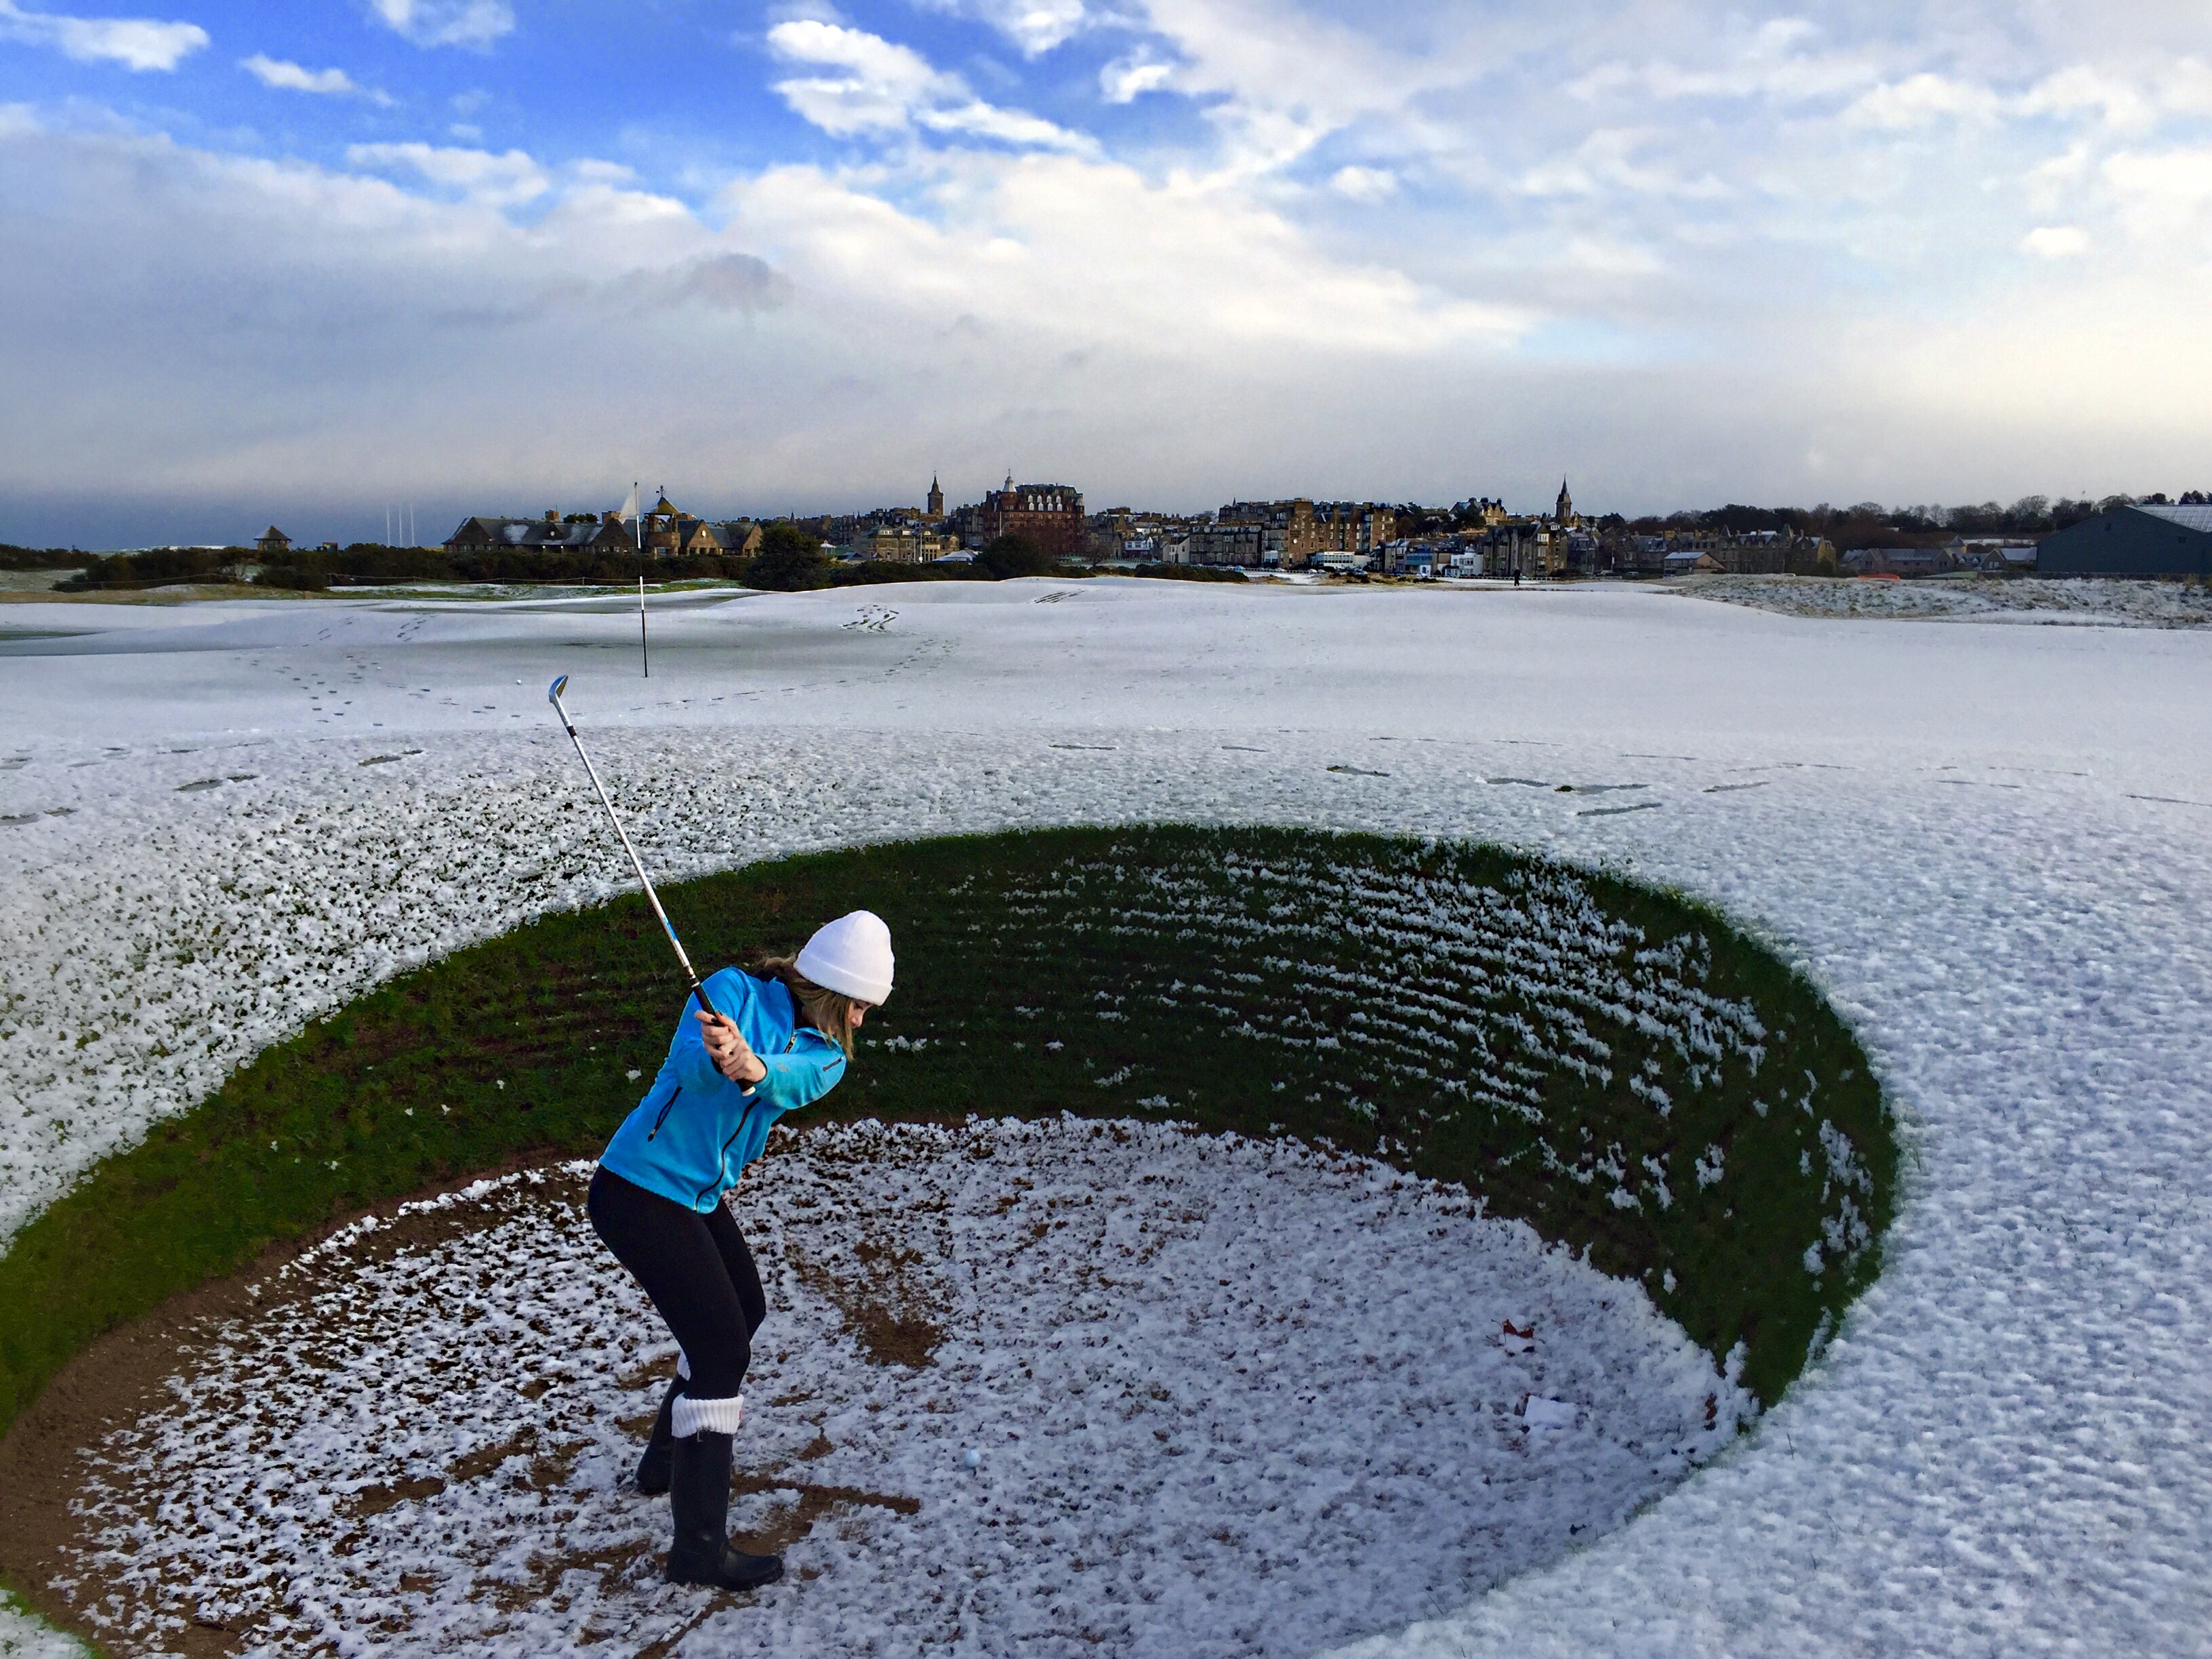 Best winter photos of golf courses covered in snow